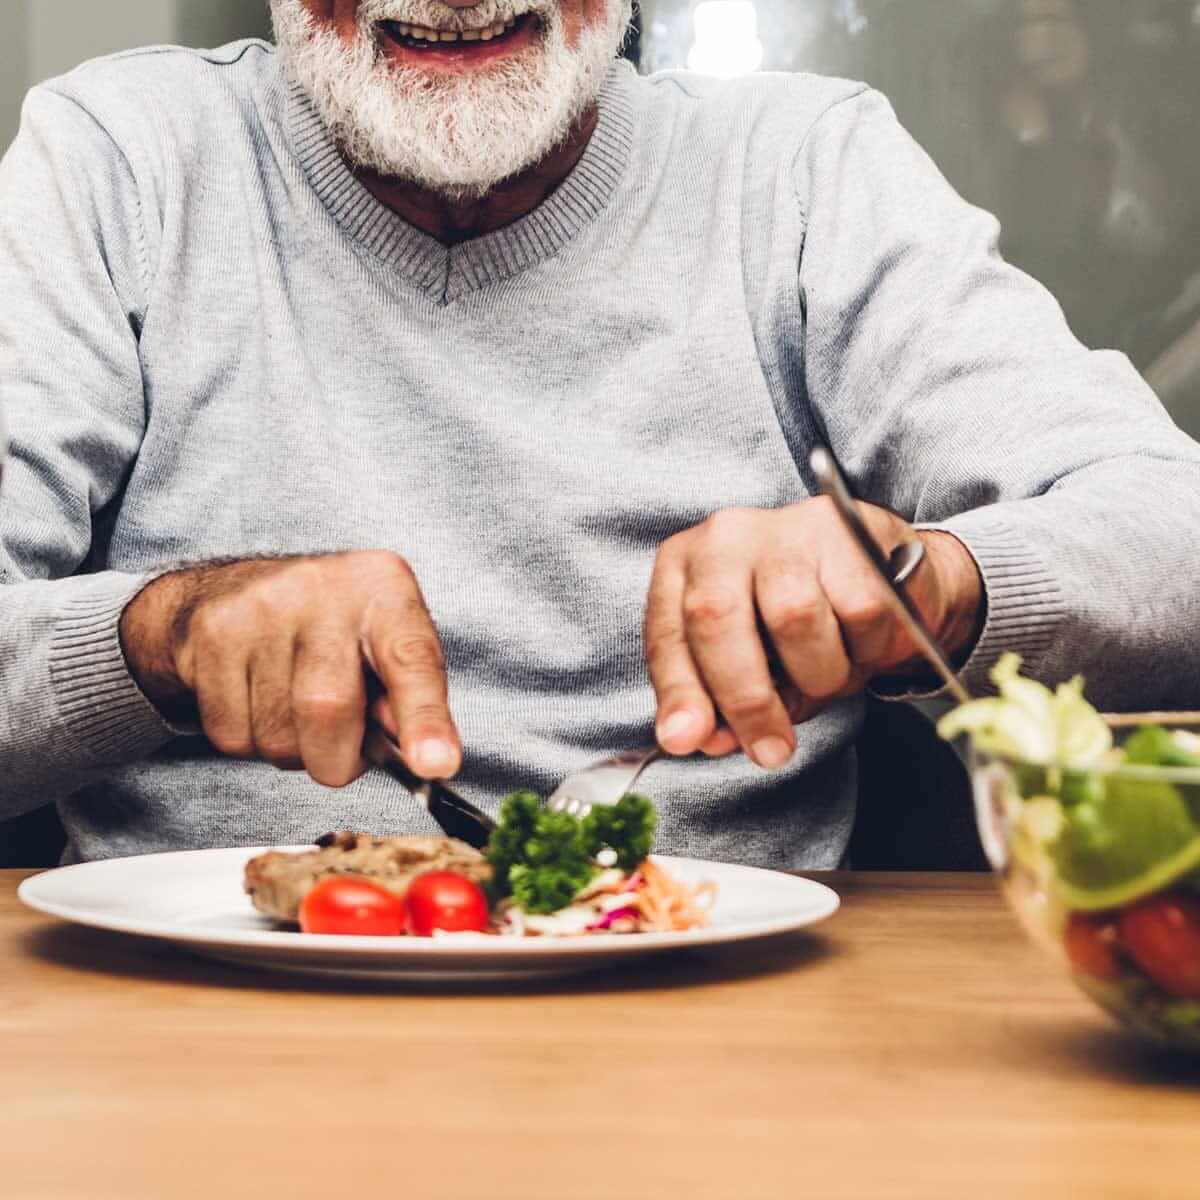 Old man eating chef-prepared meals on the table